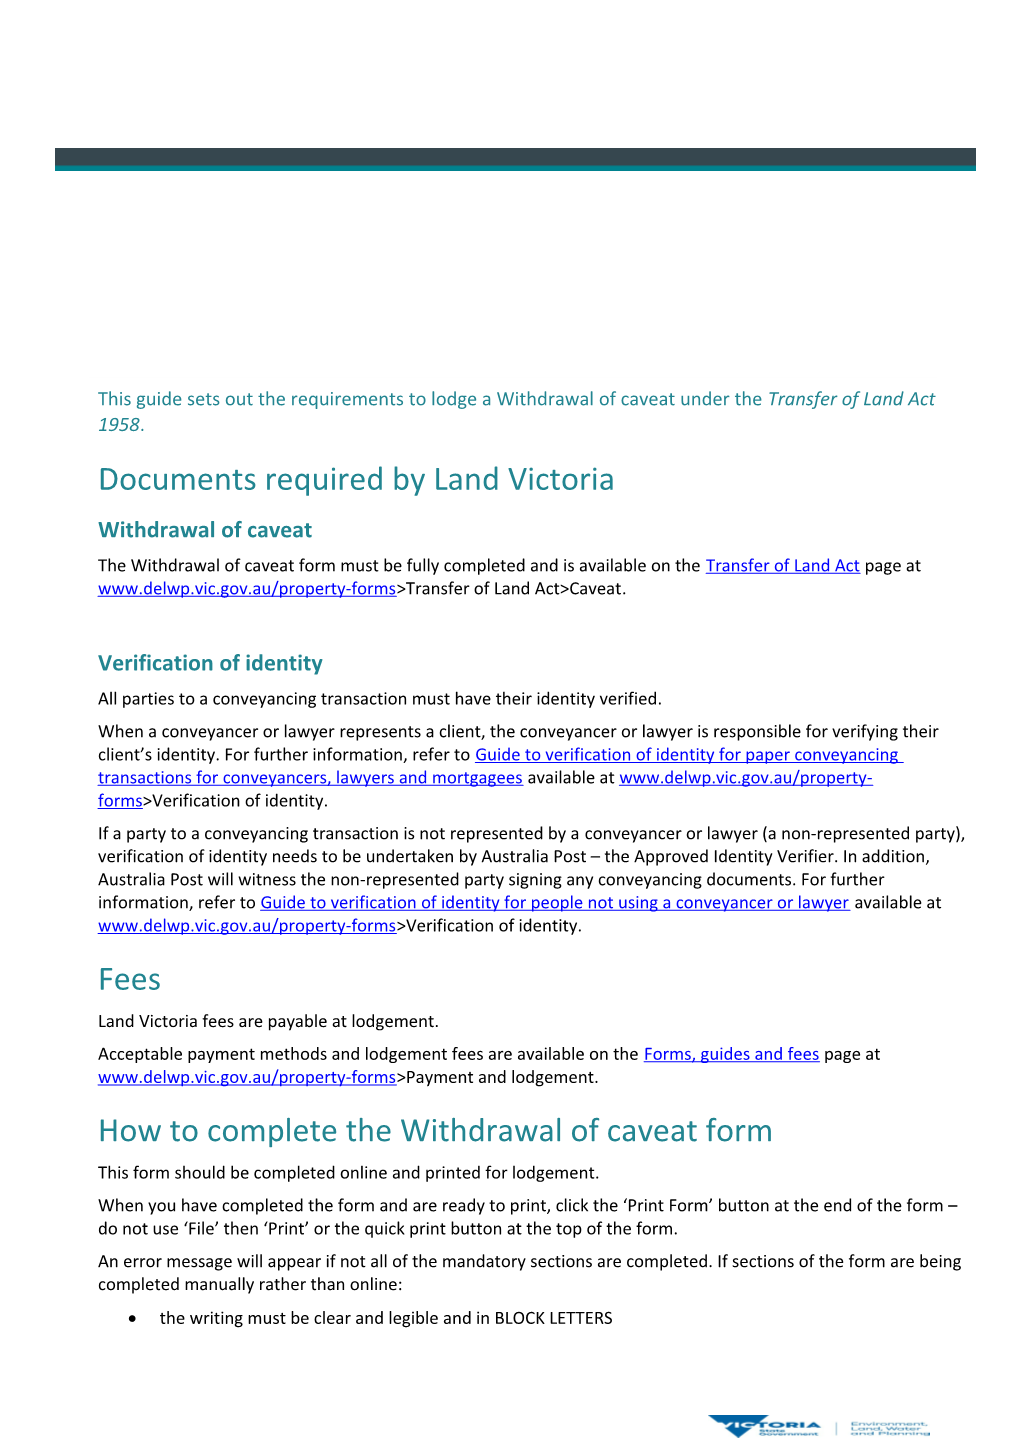 Documents Required by Land Victoria